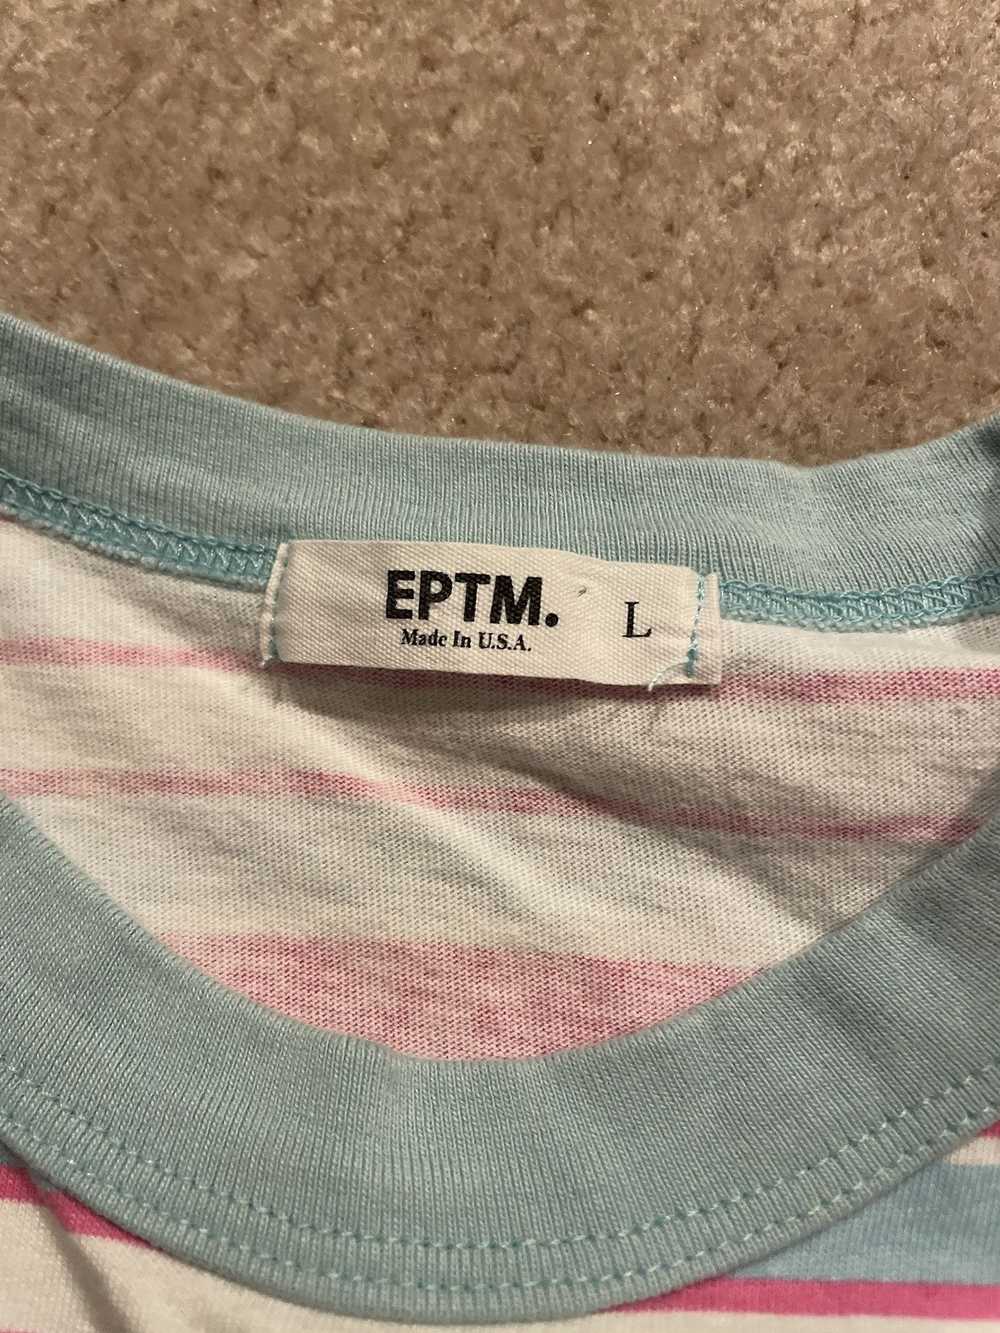 Eptm × Made In Usa Eptm blue pink stripe tee - image 4